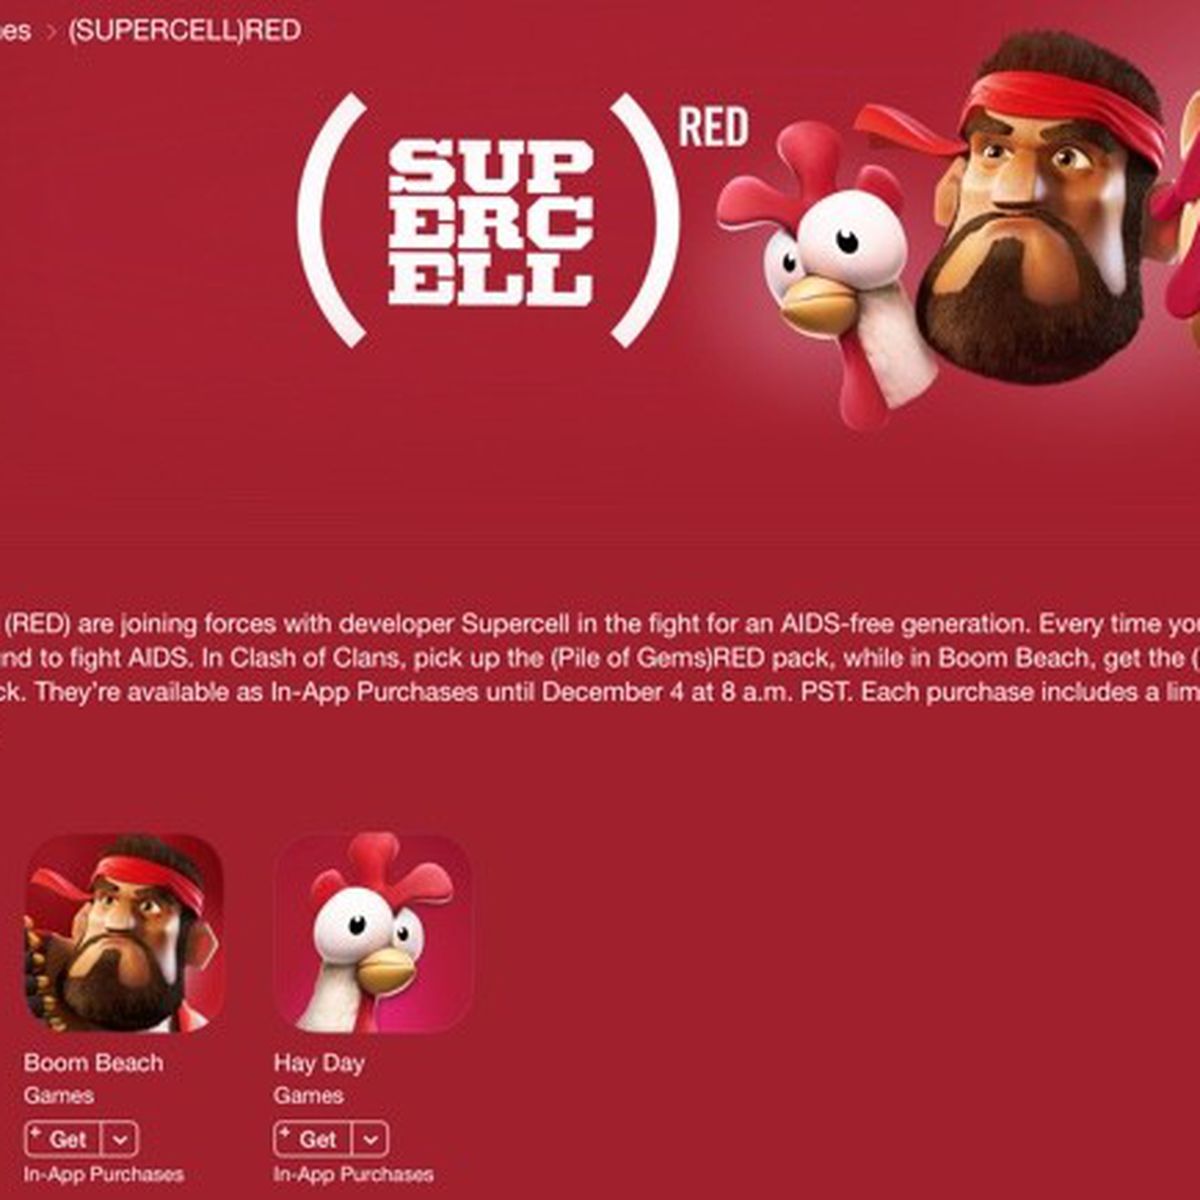 Apple Up Supercell for 2015 World Day Campaign - MacRumors